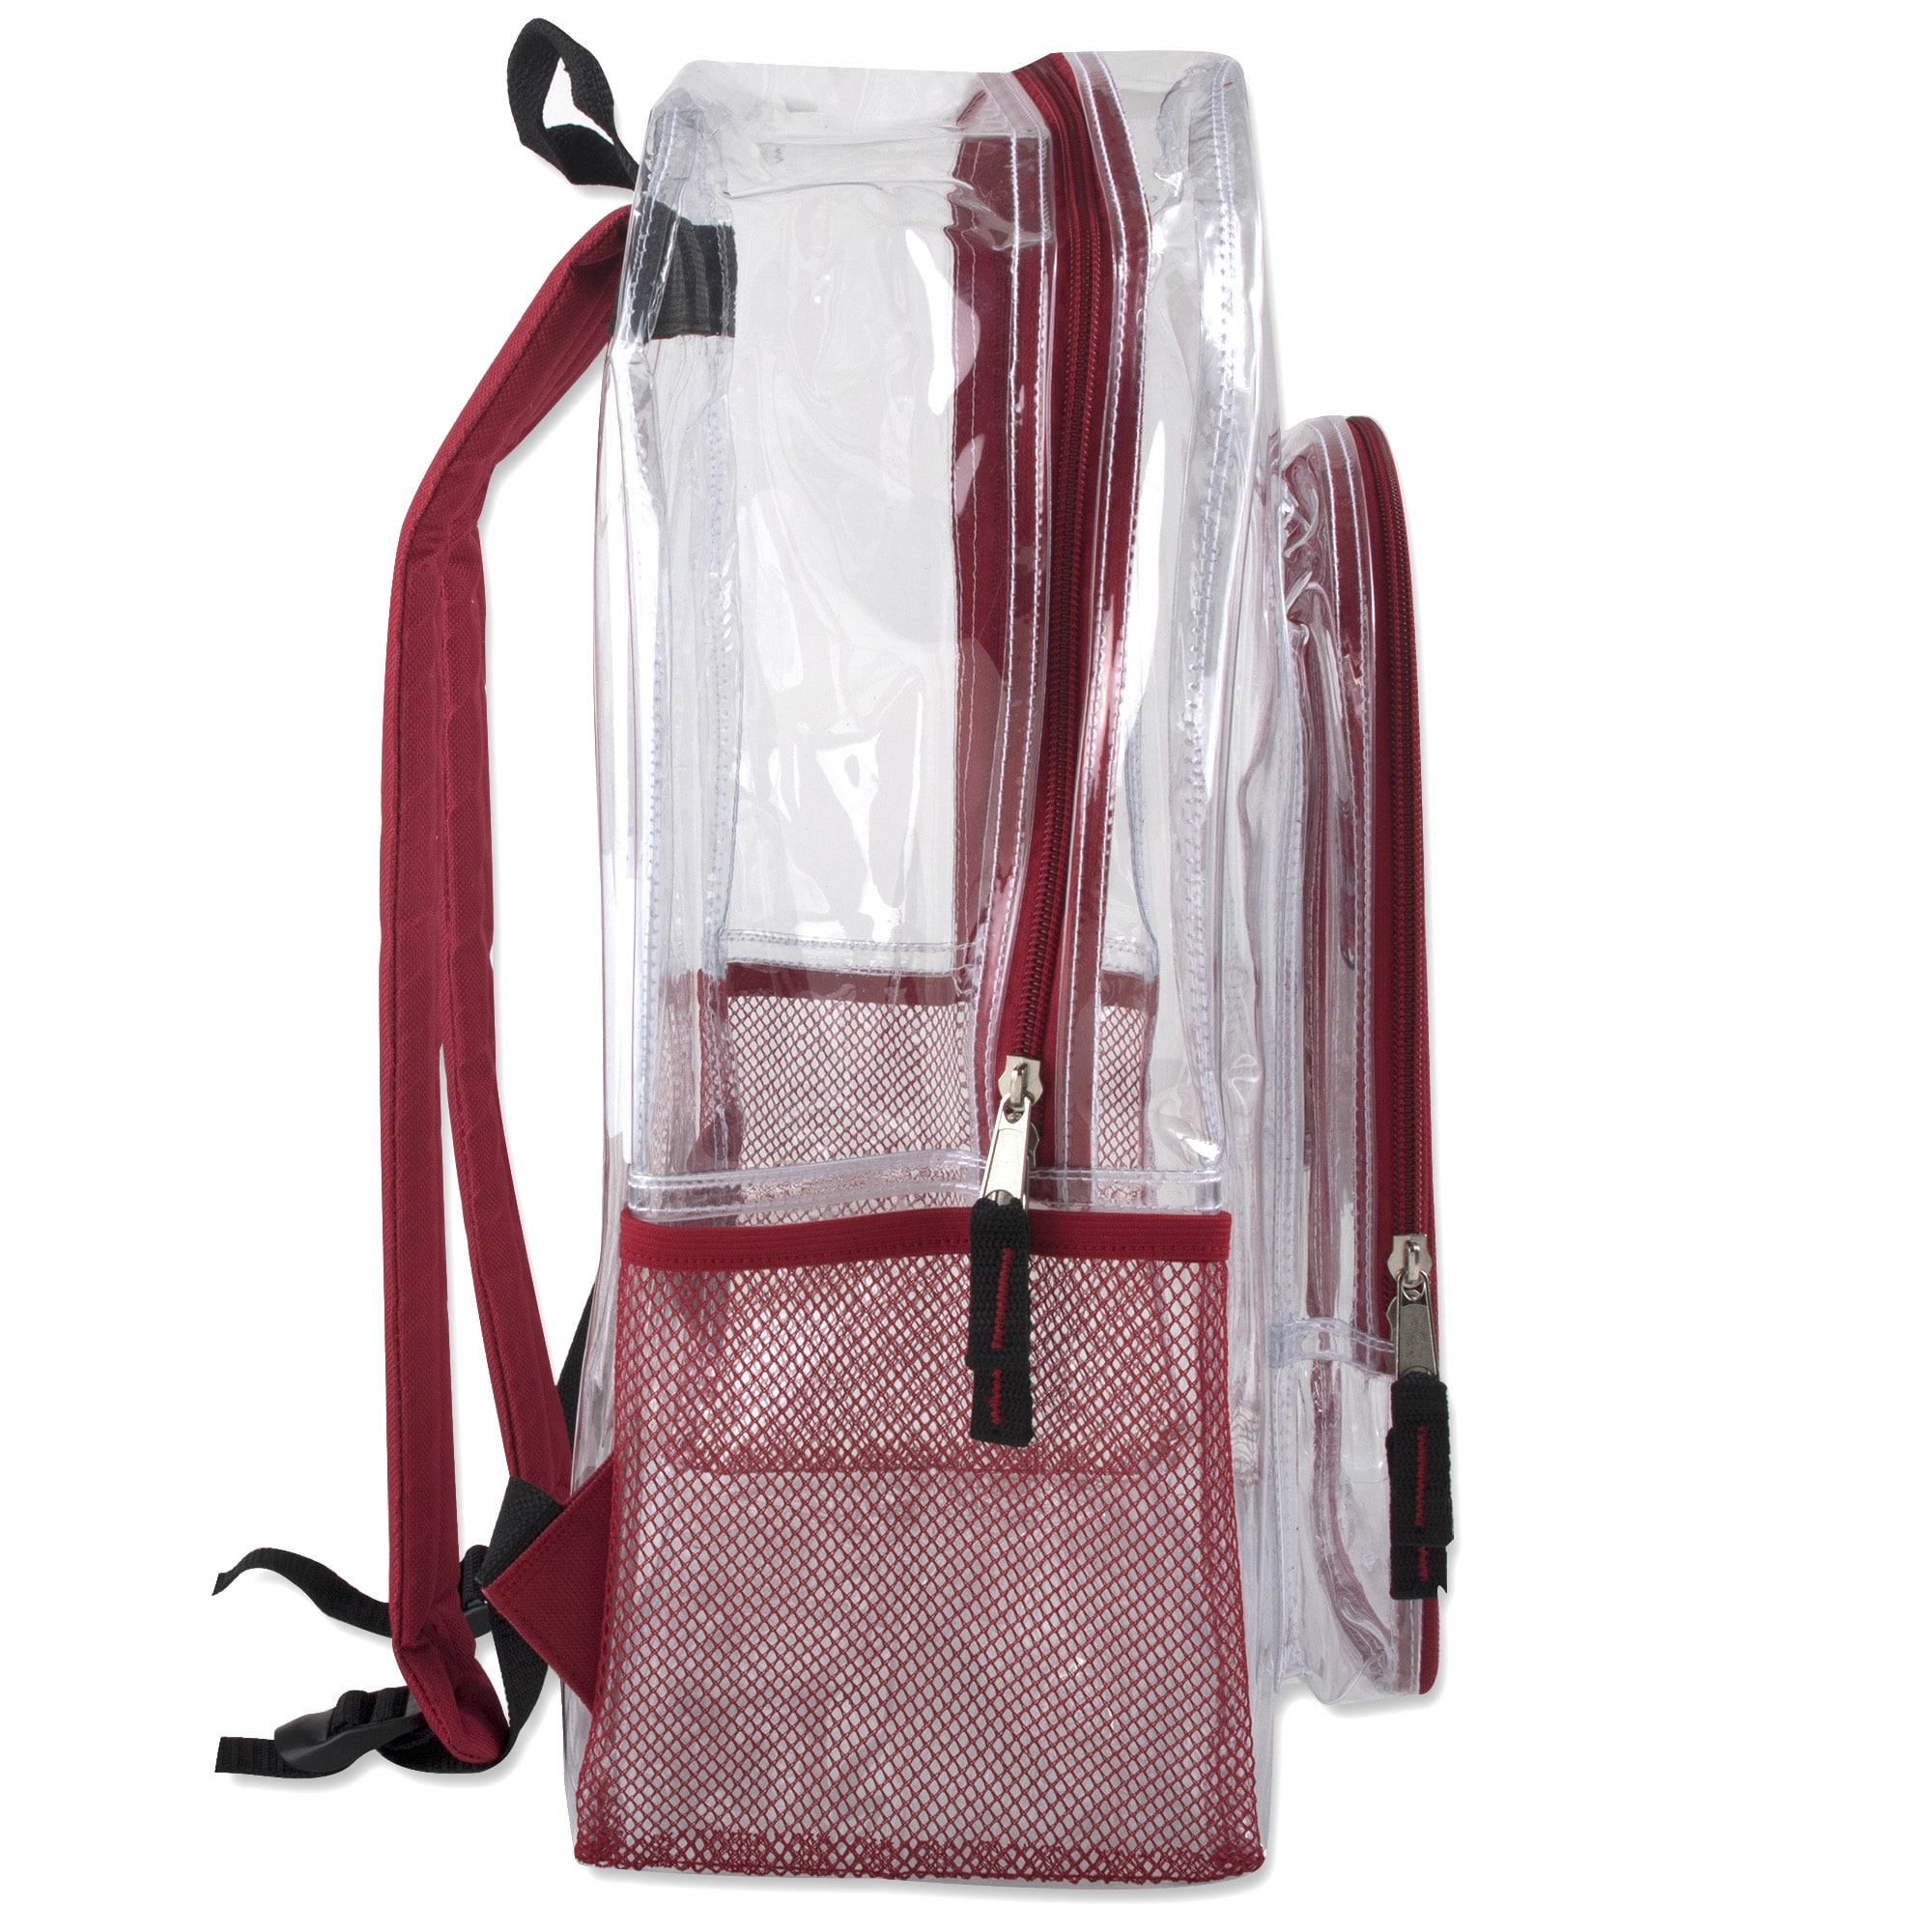 Trailmaker Carrying Case (Backpack), Red - image 5 of 6